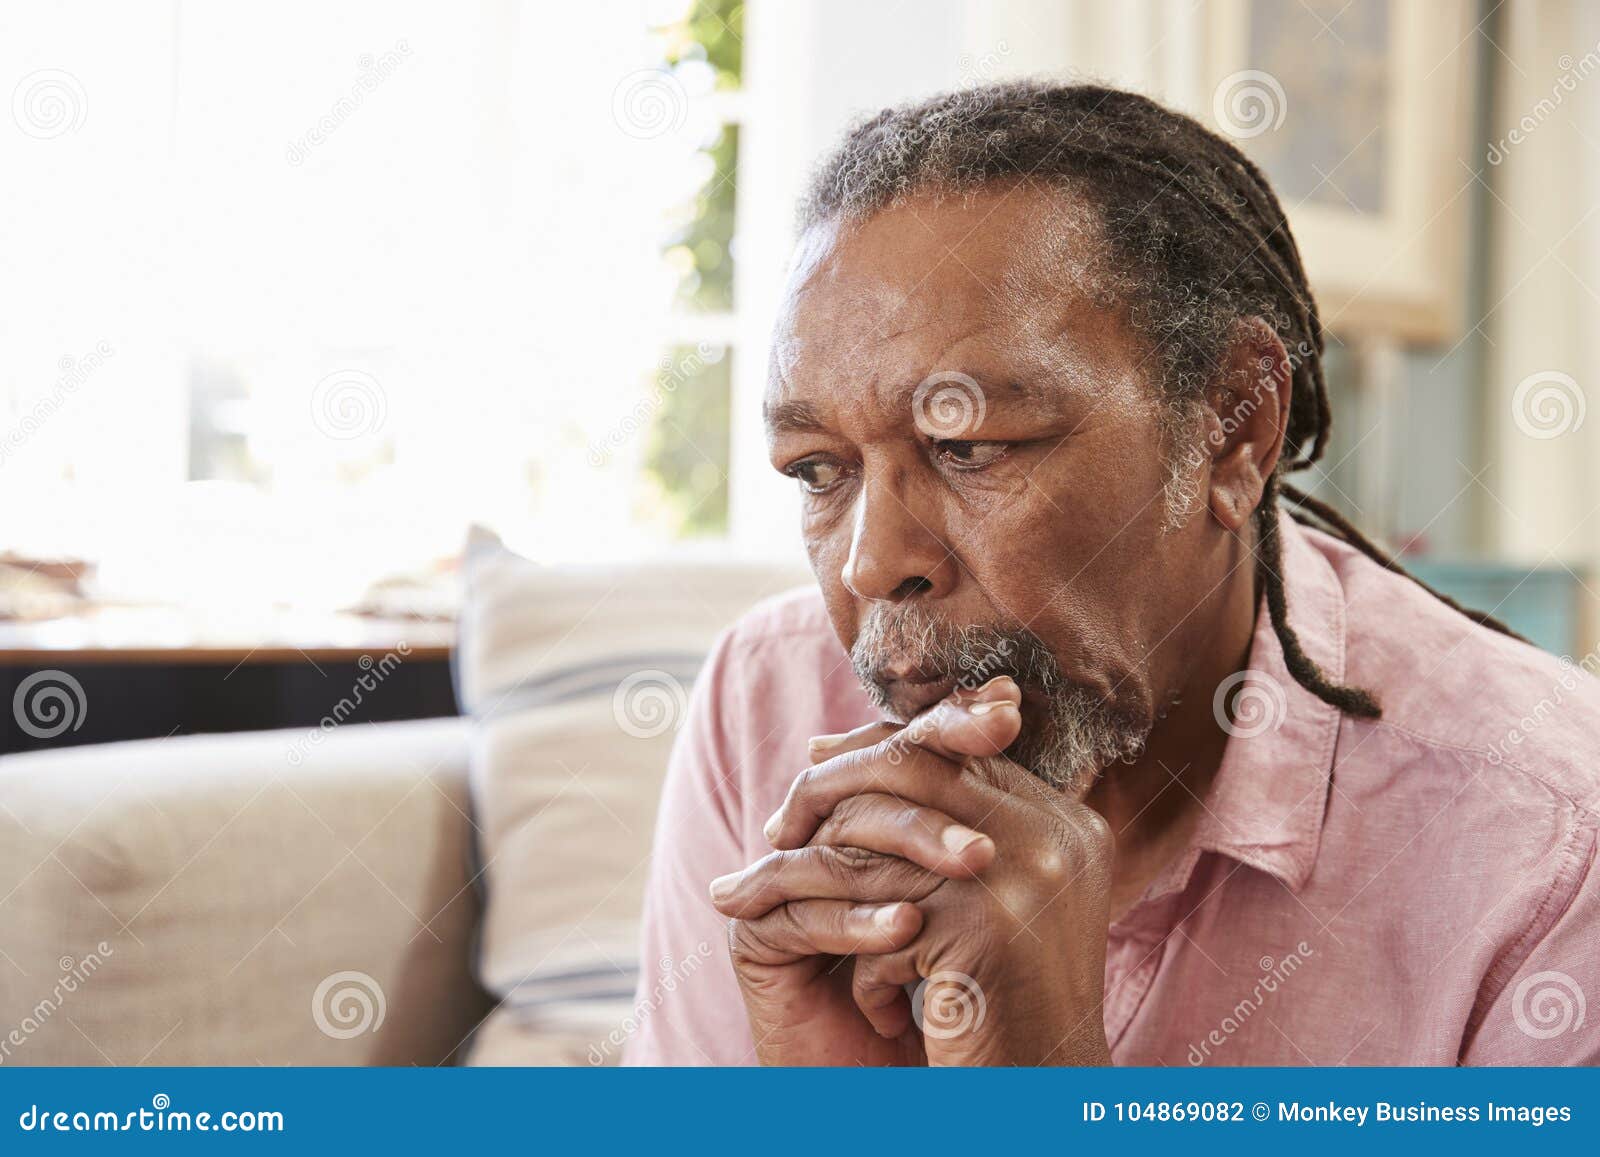 senior man sitting on sofa at home suffering from depression